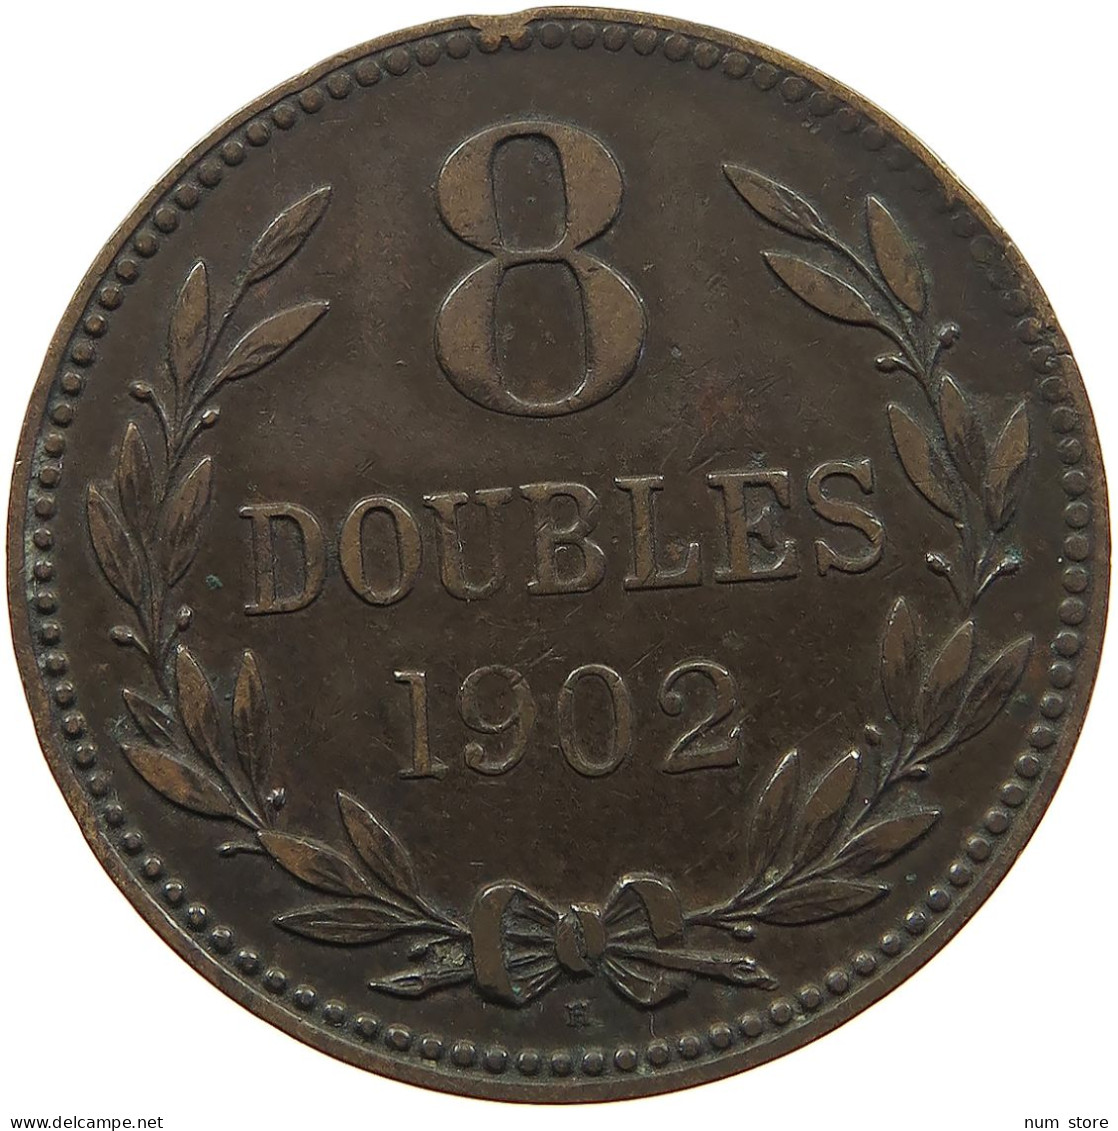 GUERNSEY 8 DOUBLES 1902 Edward VII., 1901 - 1910 #s075 0597 - Guernesey